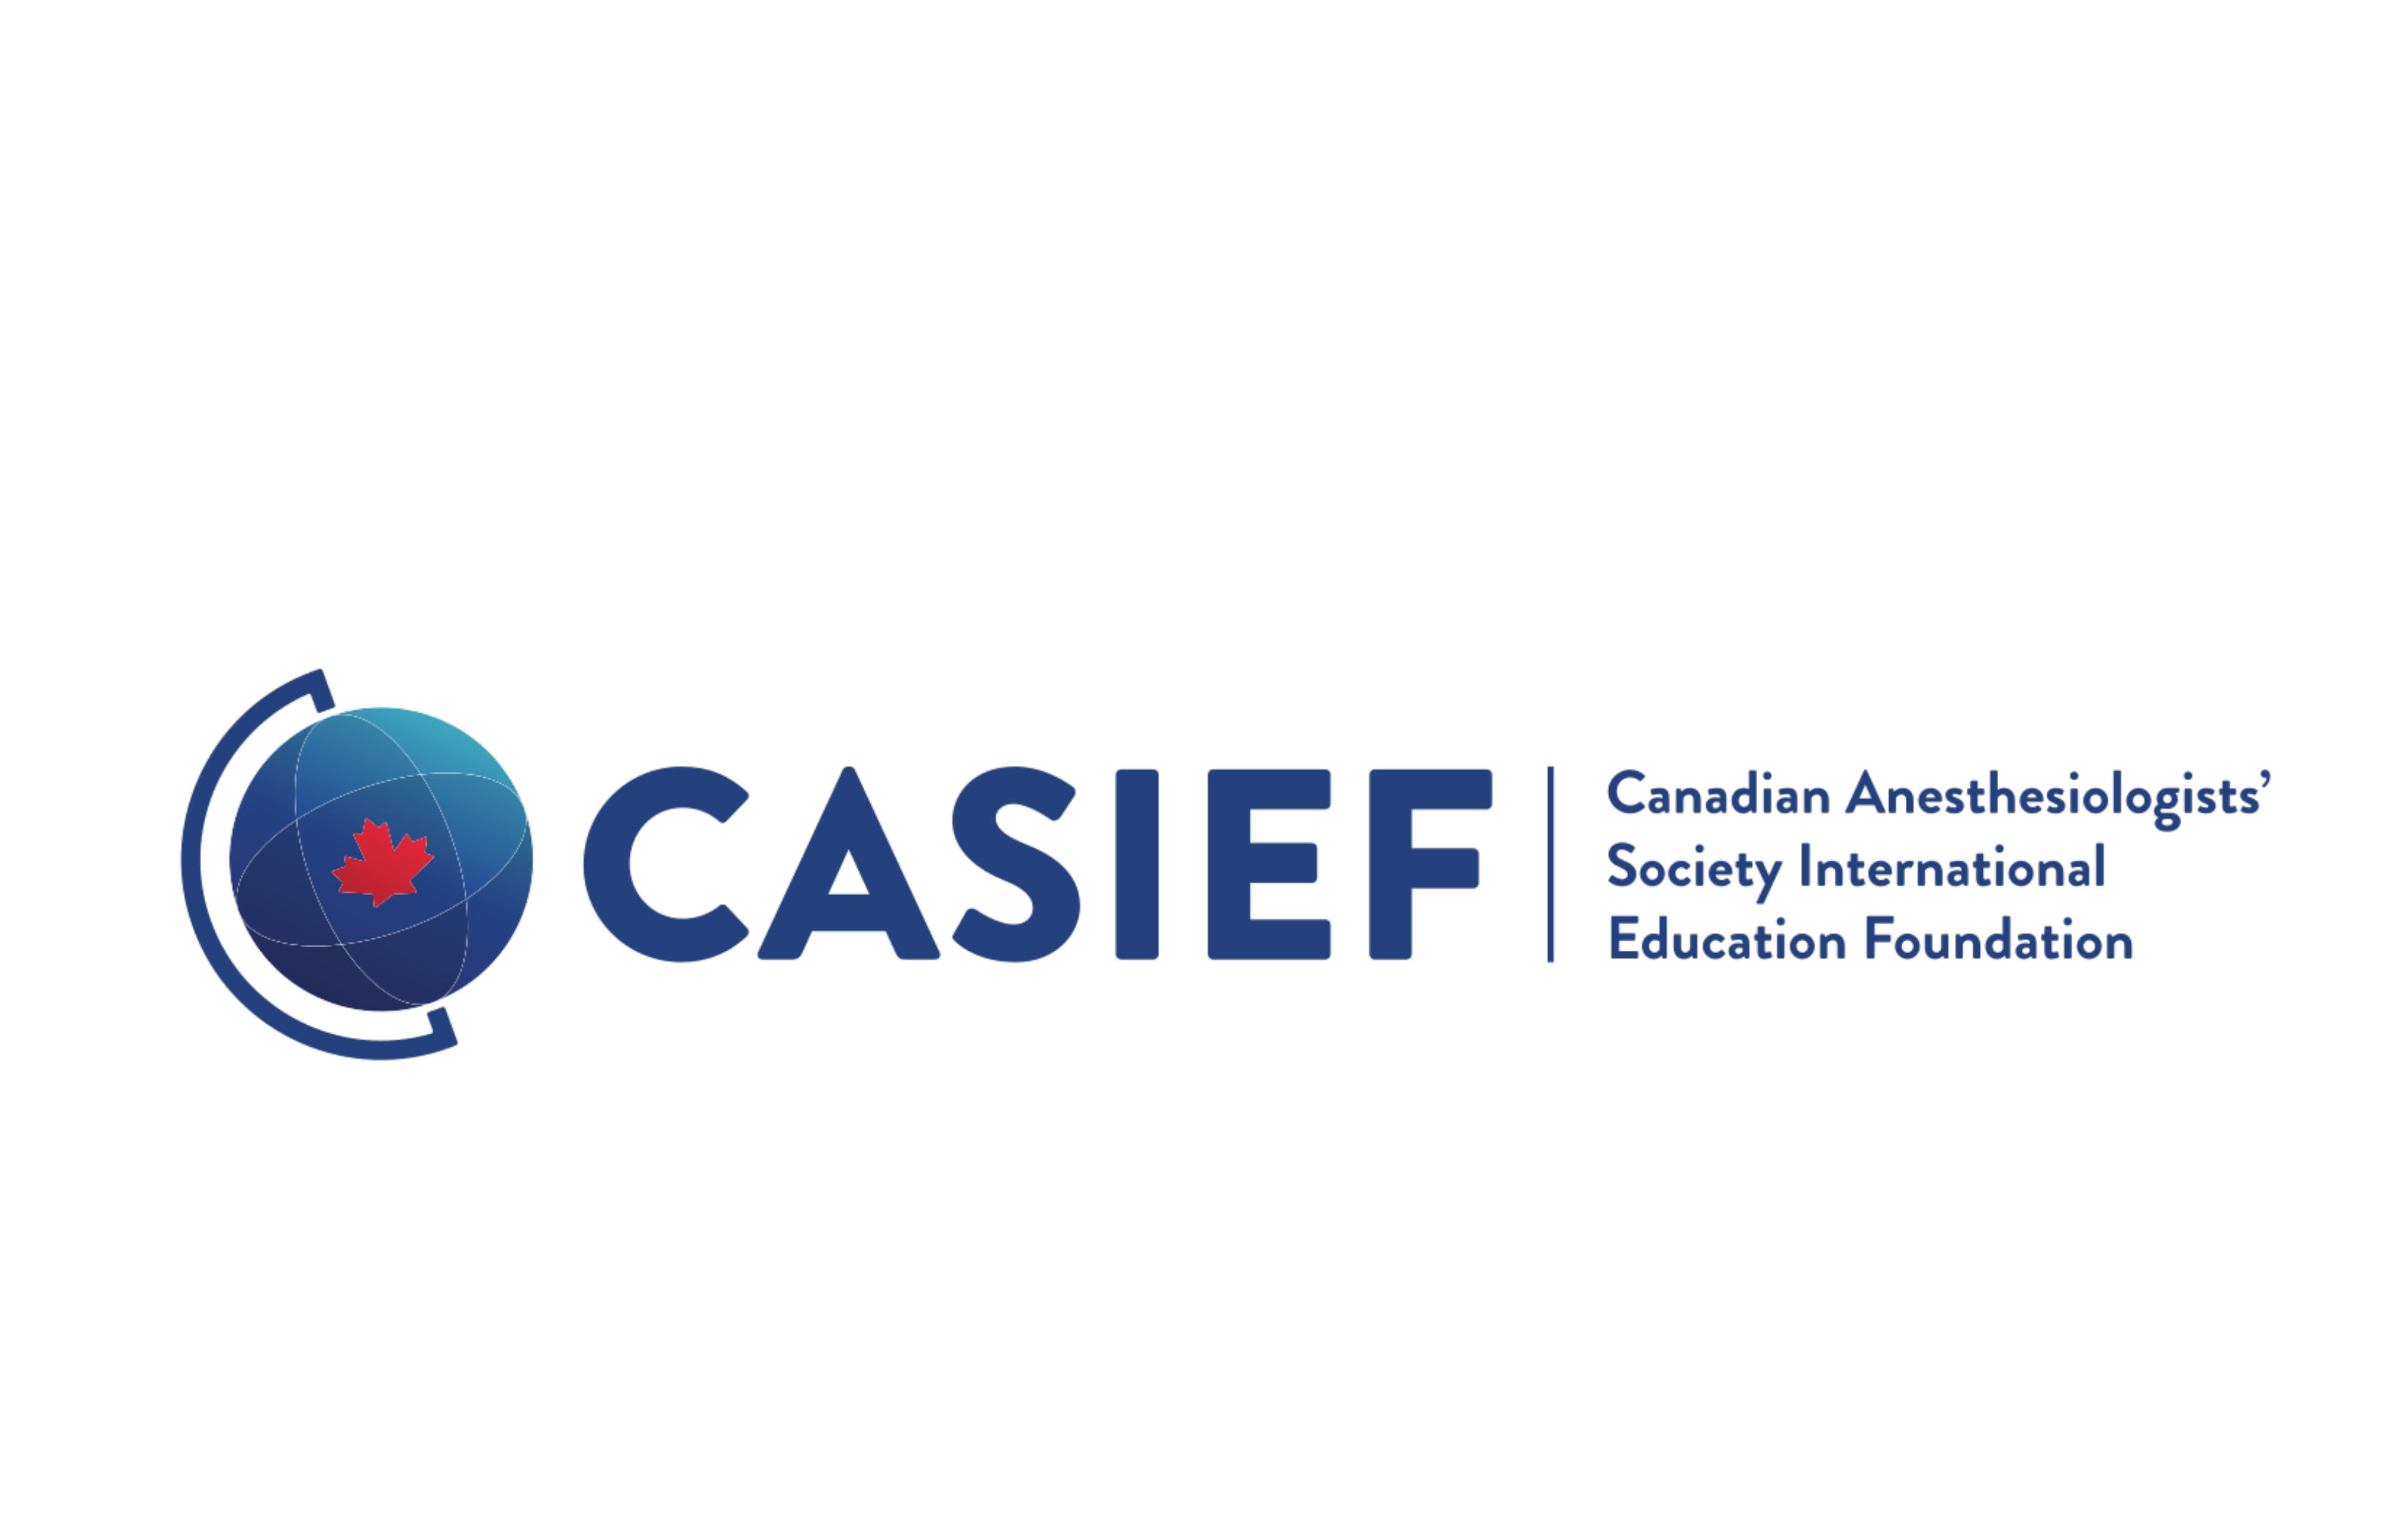 
                         Global Anesthesia                                                    - 
                          Visit casief.ca
Please donate to CASIEF                                                    